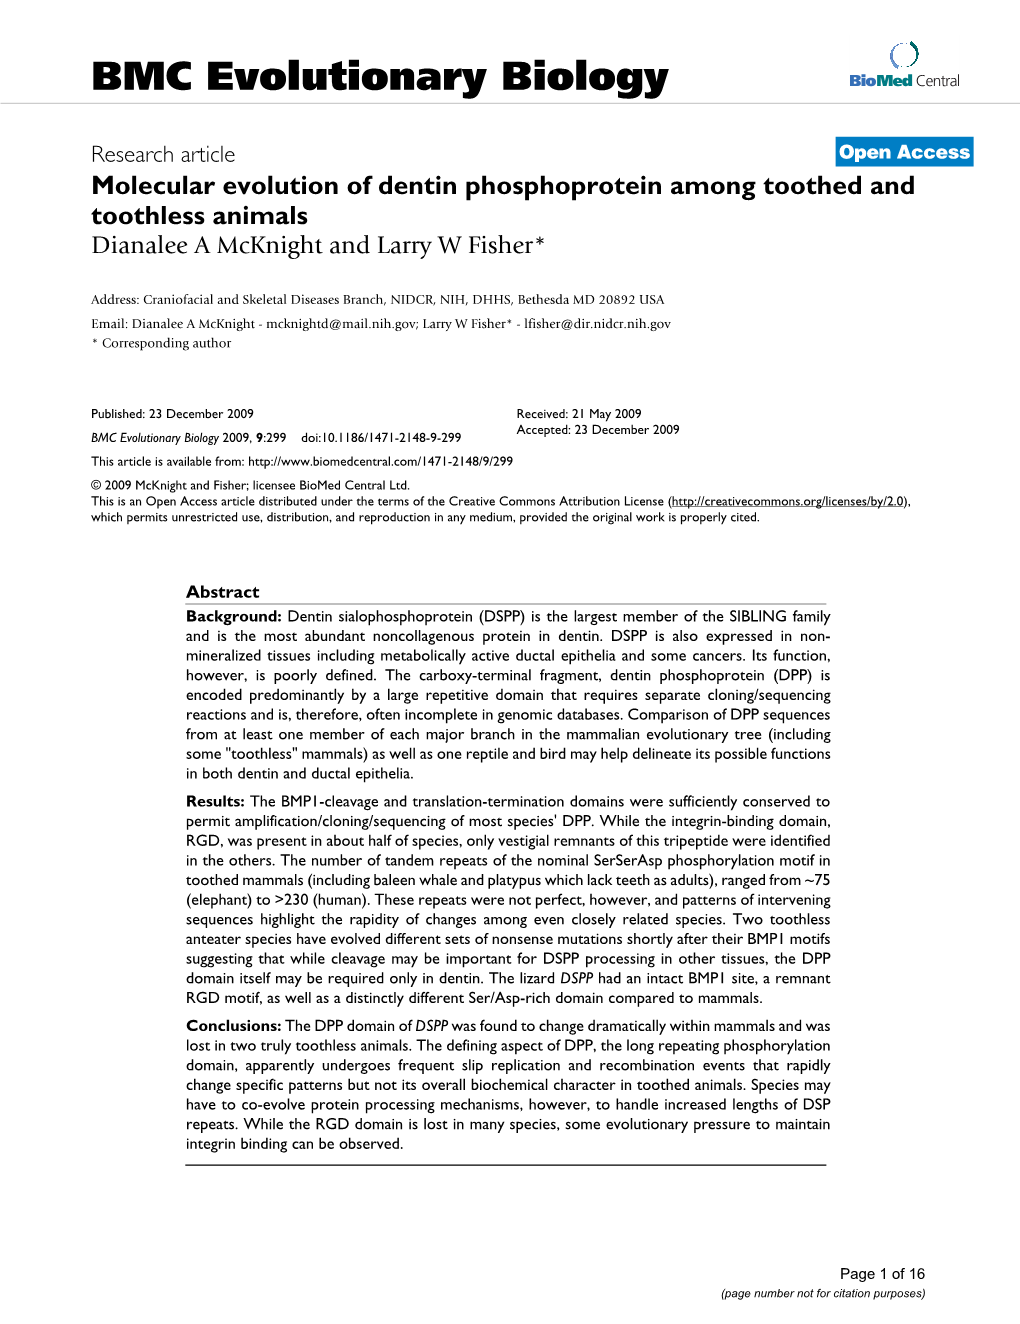 Molecular Evolution of Dentin Phosphoprotein Among Toothed and Toothless Animals Dianalee a Mcknight and Larry W Fisher*